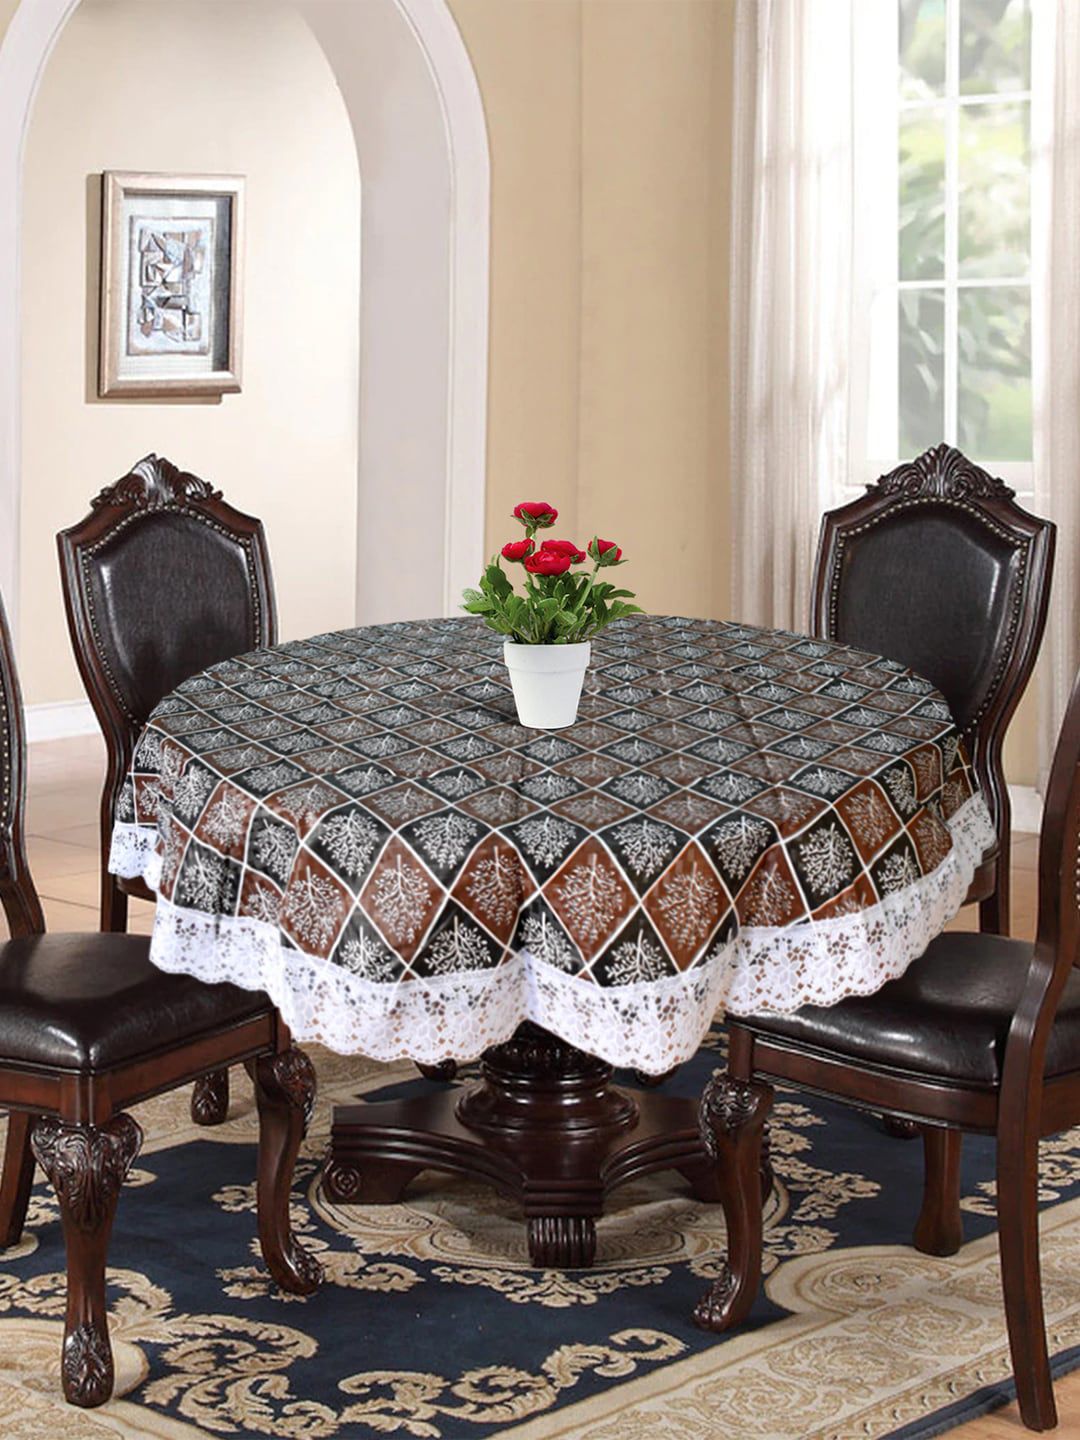 Kuber Industries Black & Brown Printed 4 Seater Round Shape Table Cover Price in India